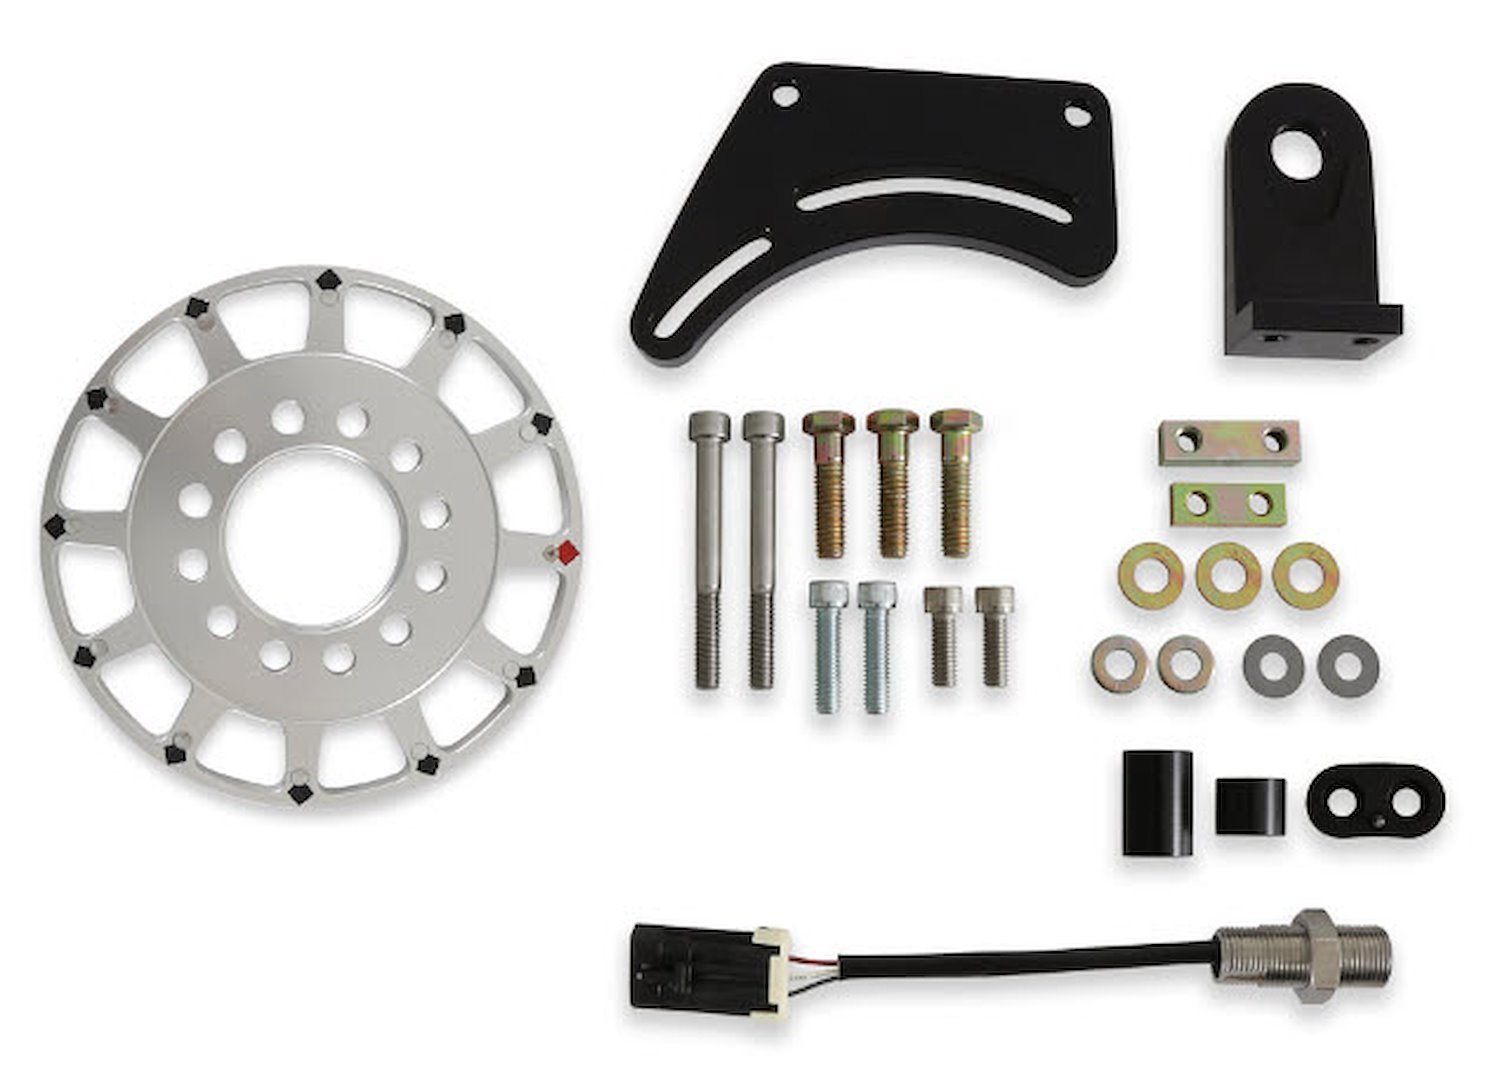 EFI Crank Trigger System for Ford Coyote Engines